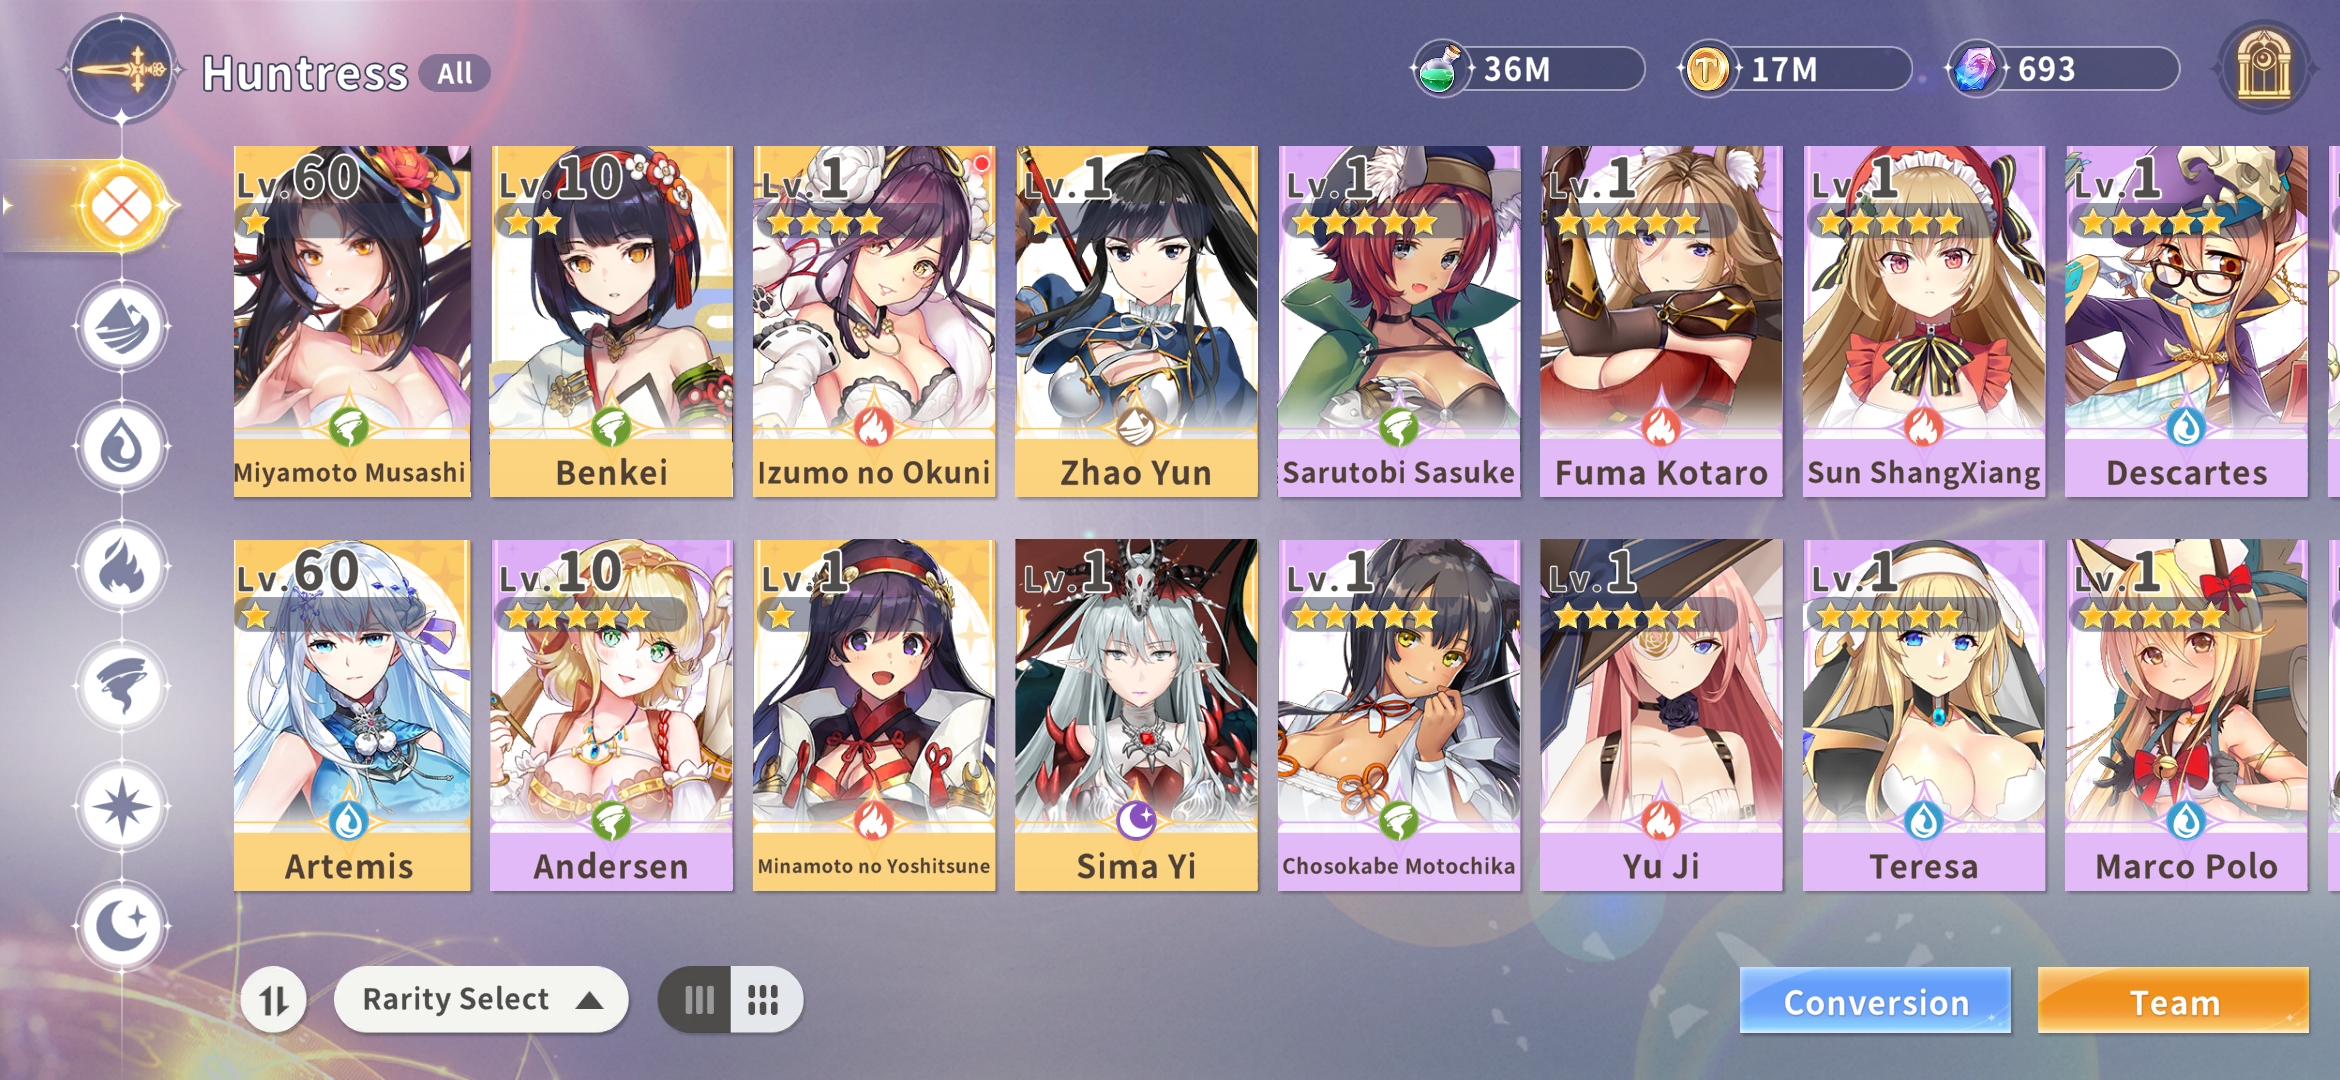 SOLD S9 Whale Account, VIP 9. All Ssr, Full 6* Teams End Game